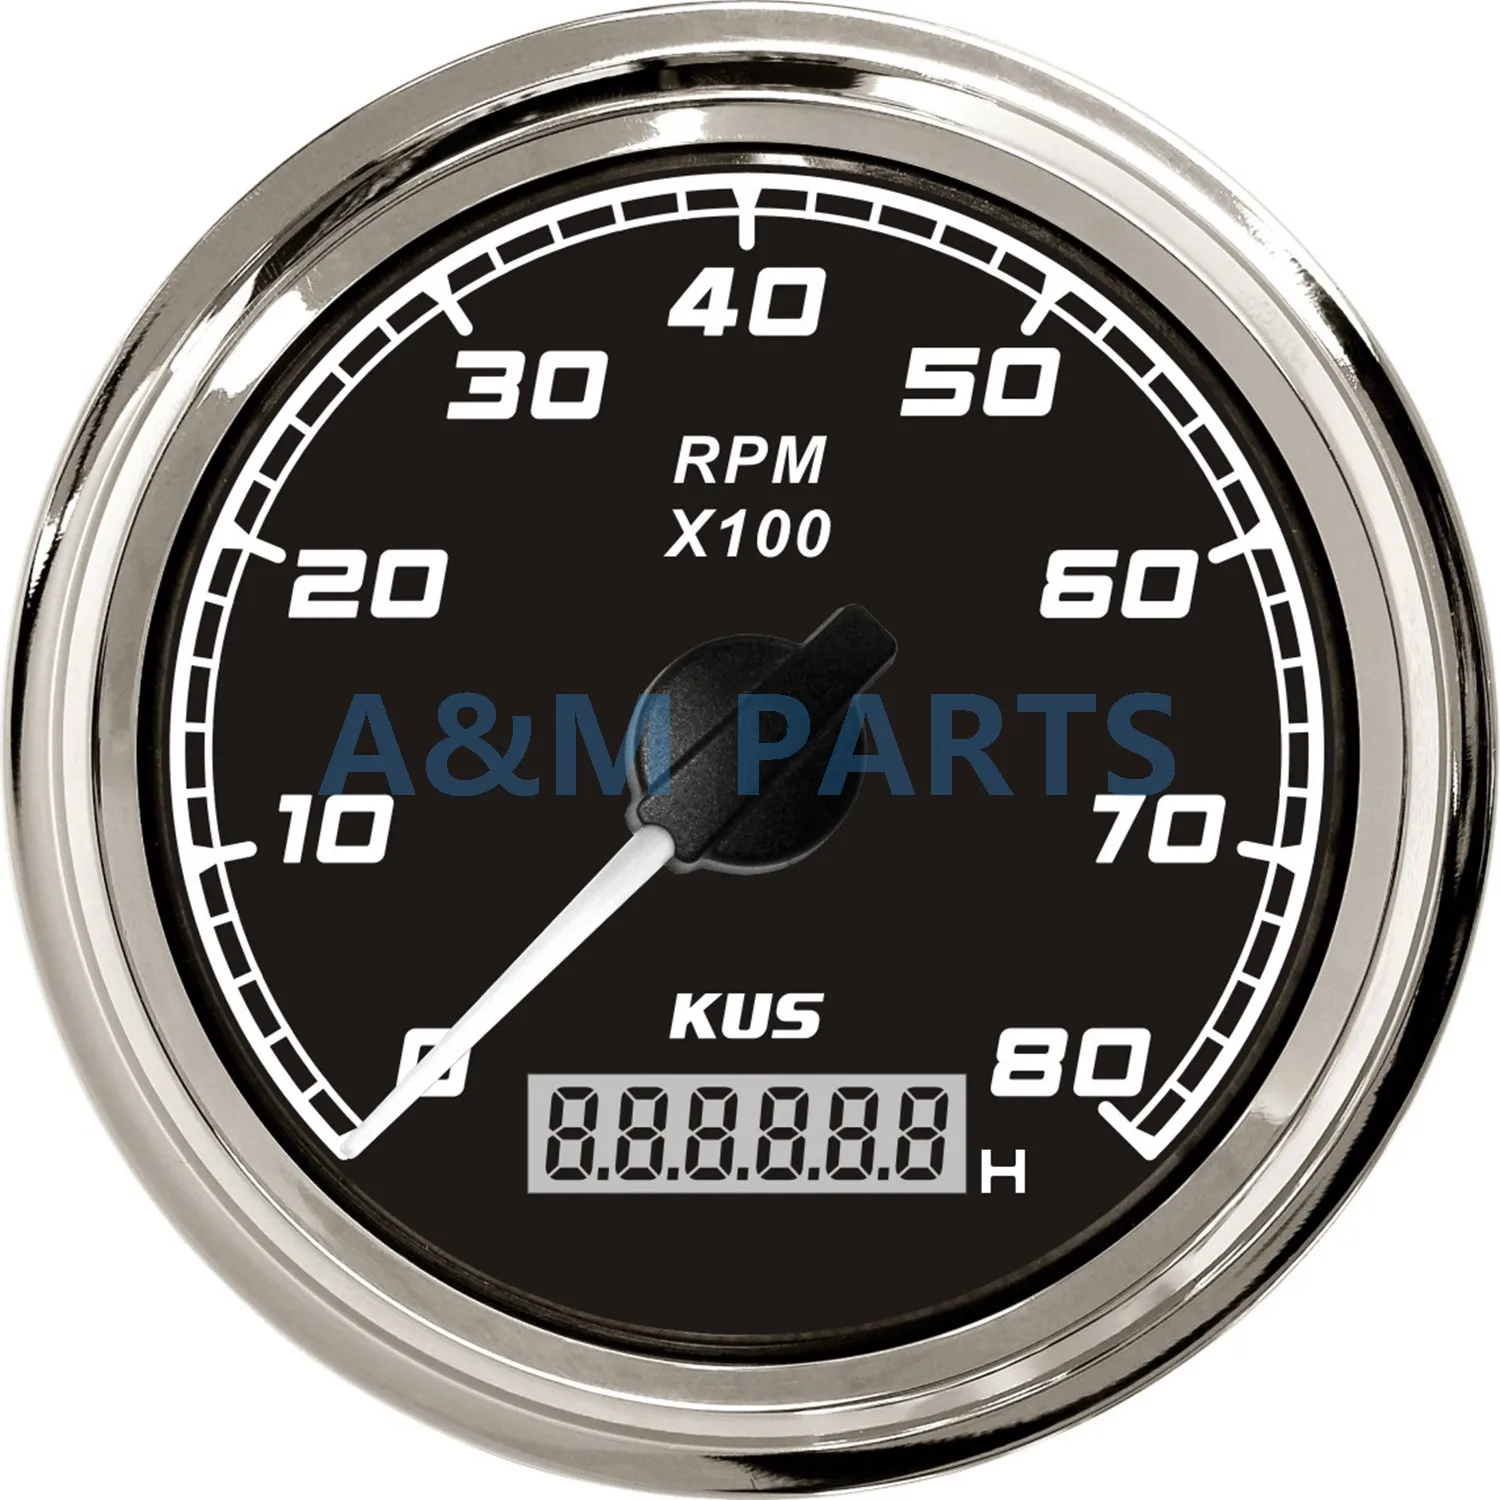 ELING Tachometer RPM Gauge with Hour Meter for Car Truck Boat Yacht 0-8000RPM 85mm with Backlight 